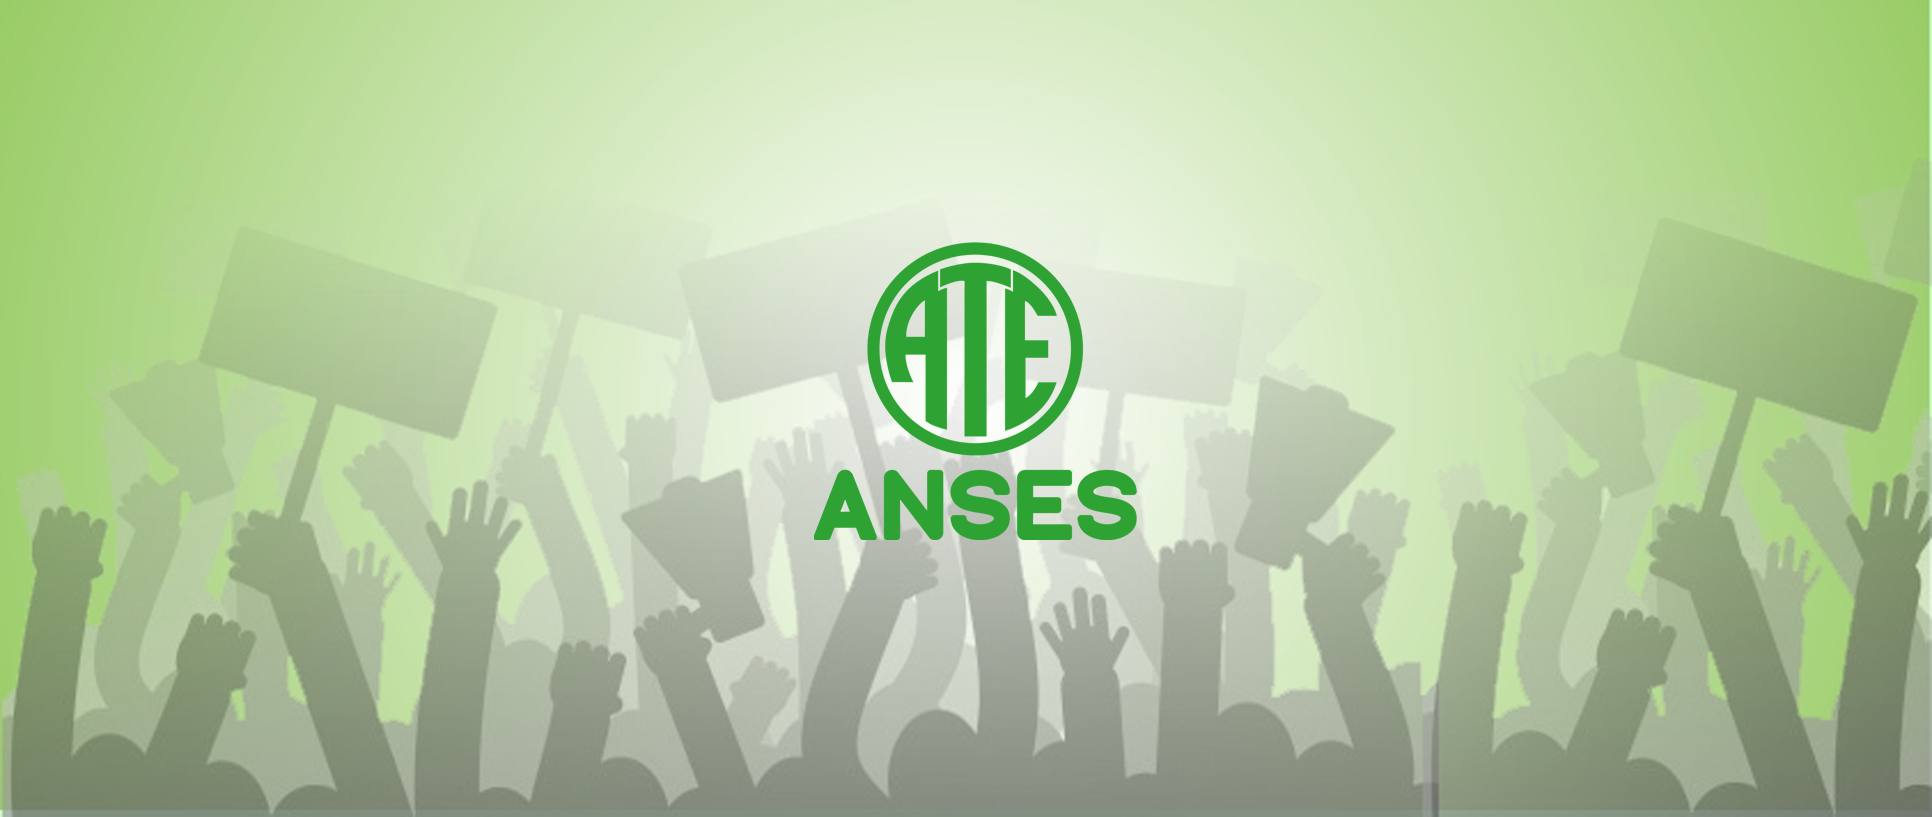 ATE ANSES